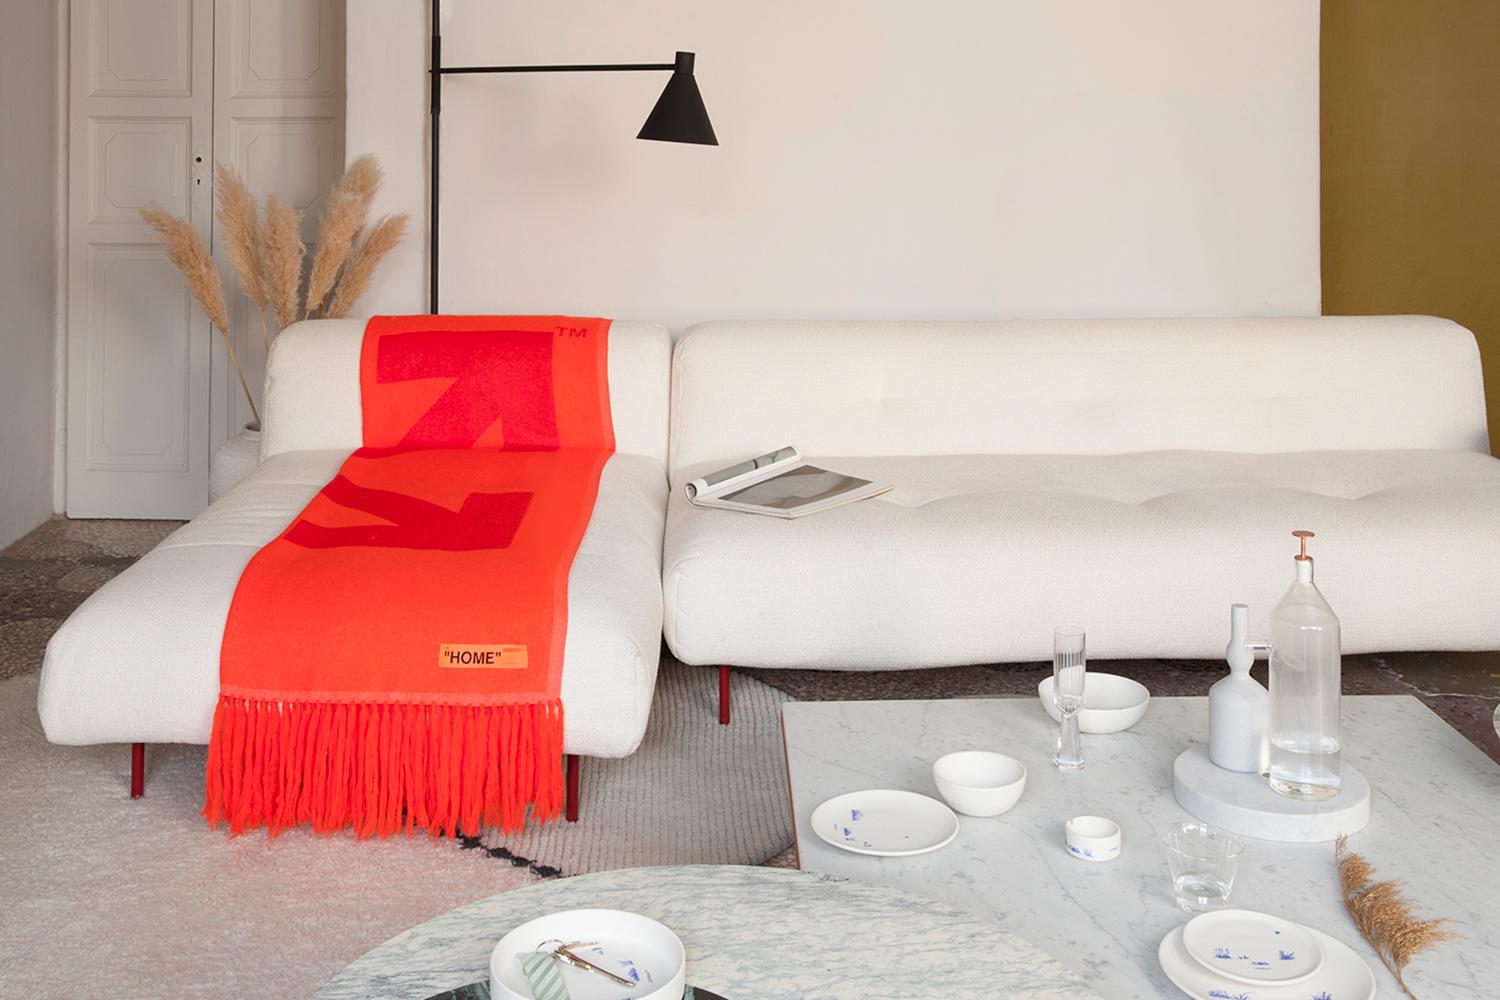 Virgil Abloh imagines homes of the future with his collection for Vitra